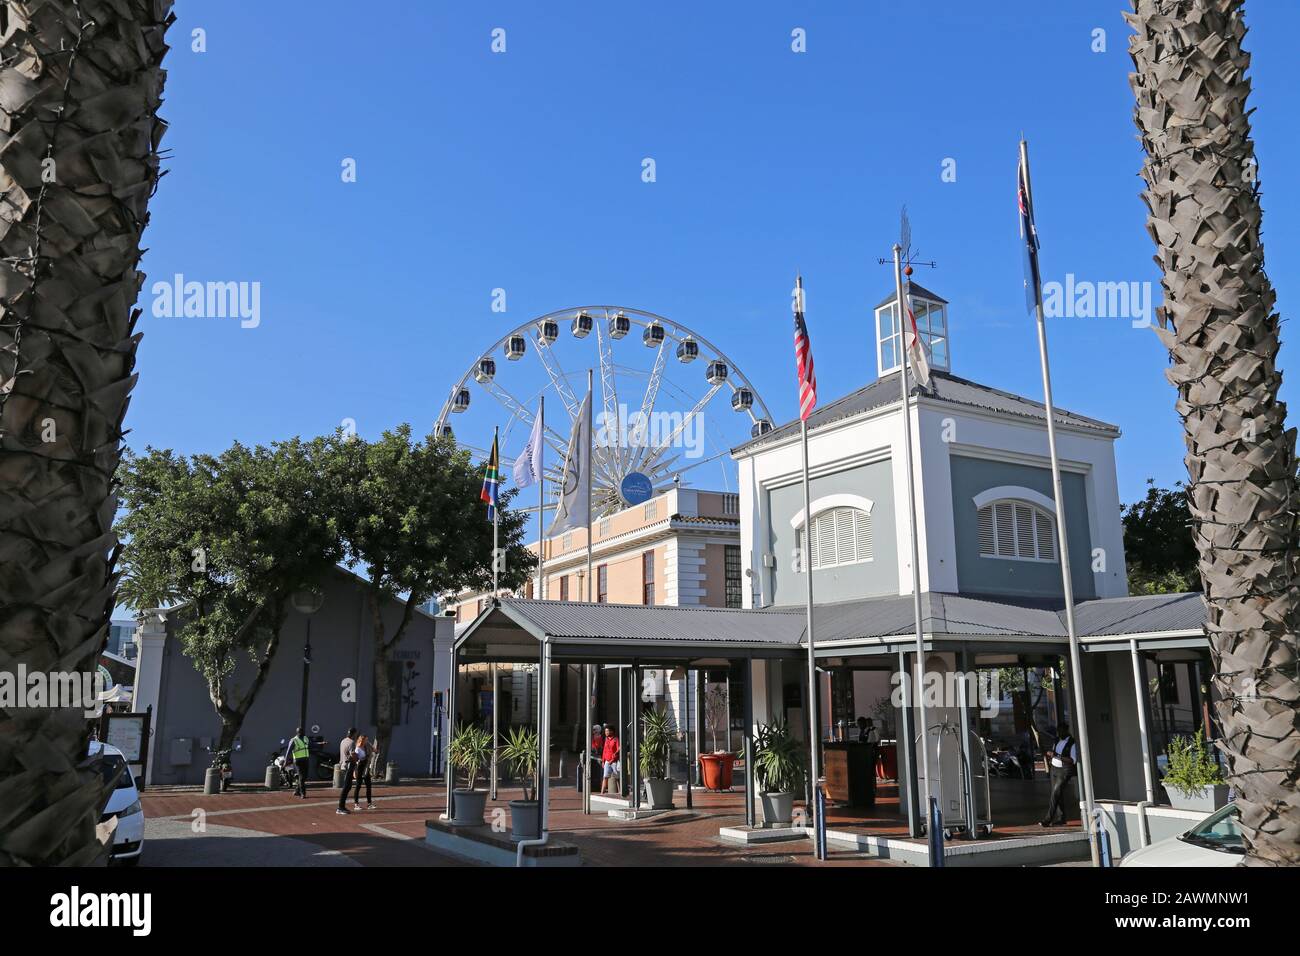 Alfred Mall and Hotel, V&A (Victoria and Alfred) Waterfront, Cape Town, Table Bay, Western Cape Province, South Africa, Africa Stock Photo